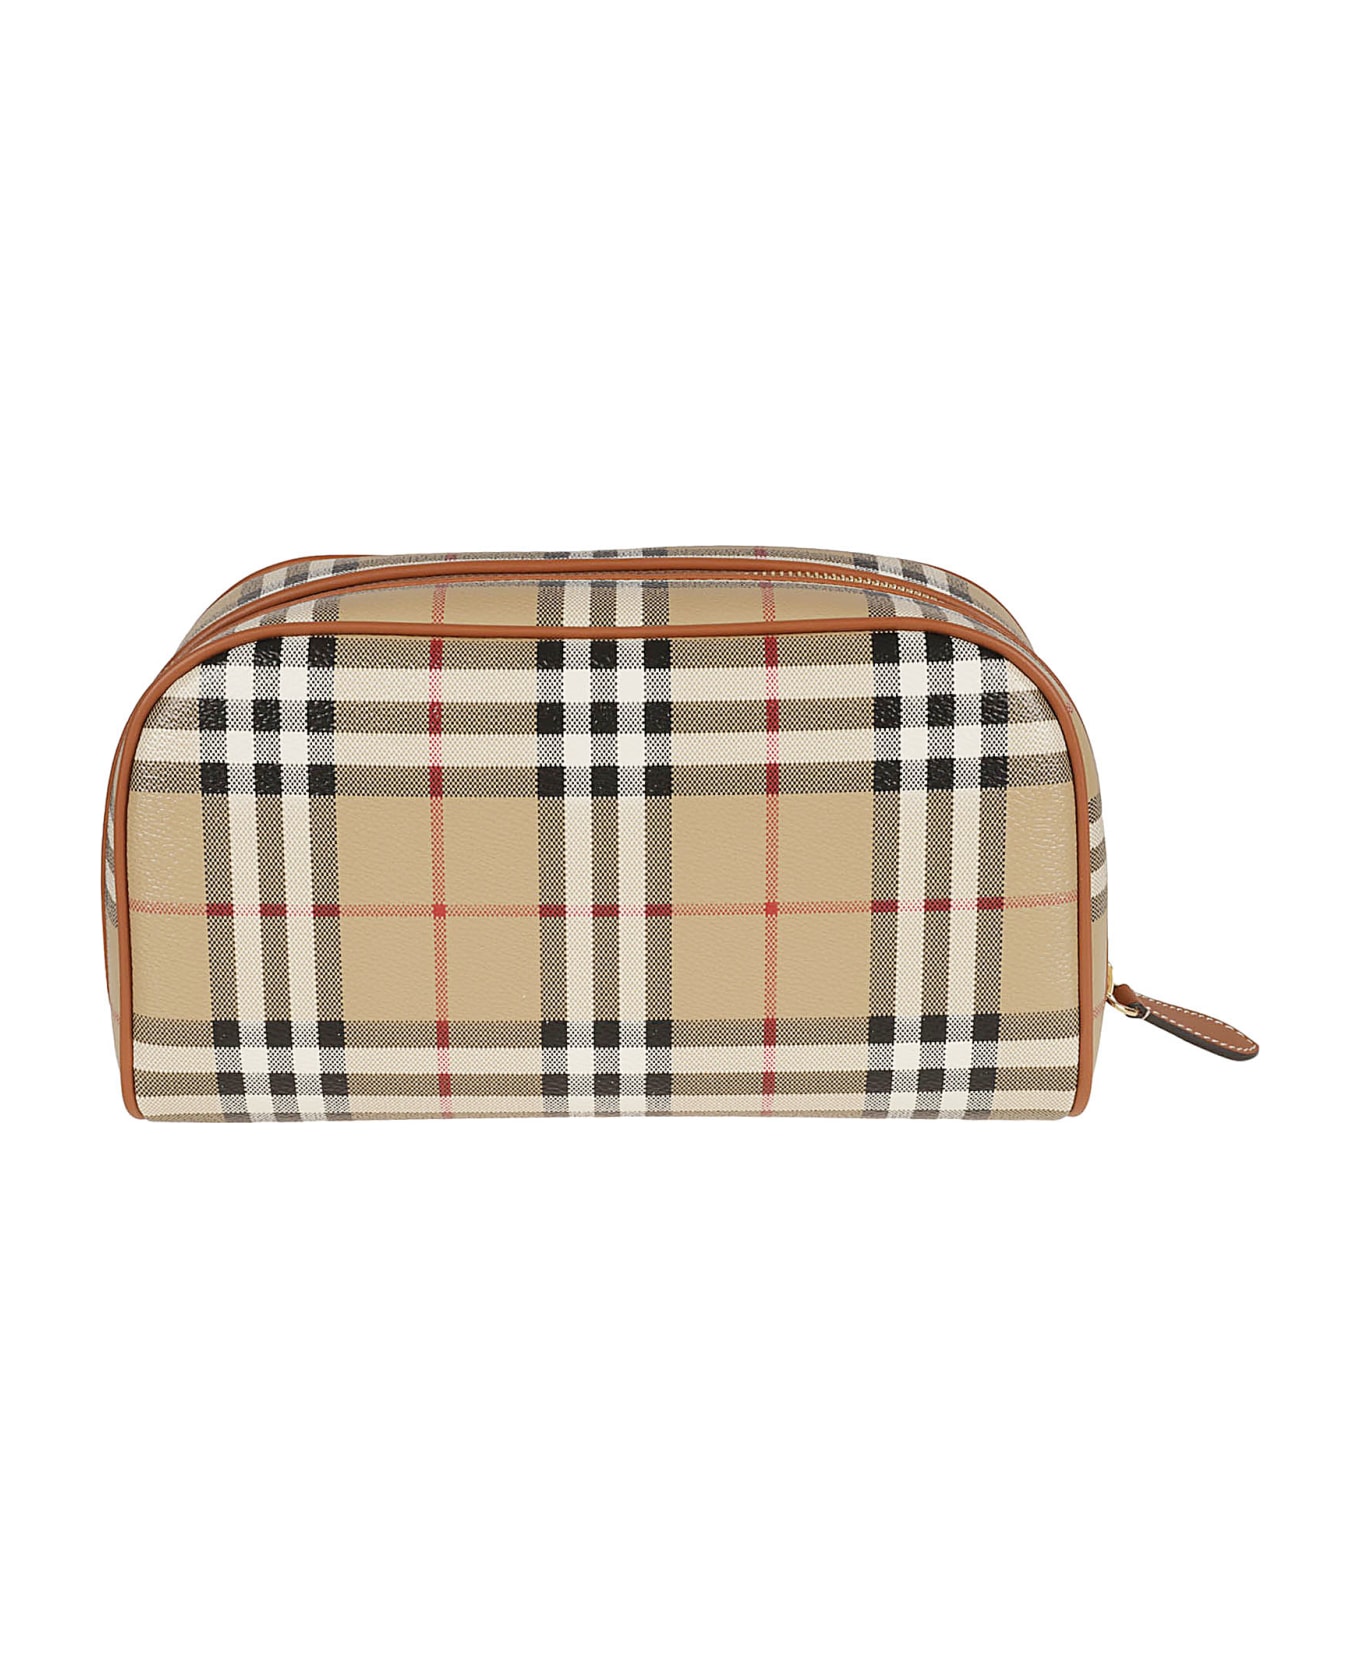 Burberry Check Logo Clutch - Archive Beige クラッチバッグ